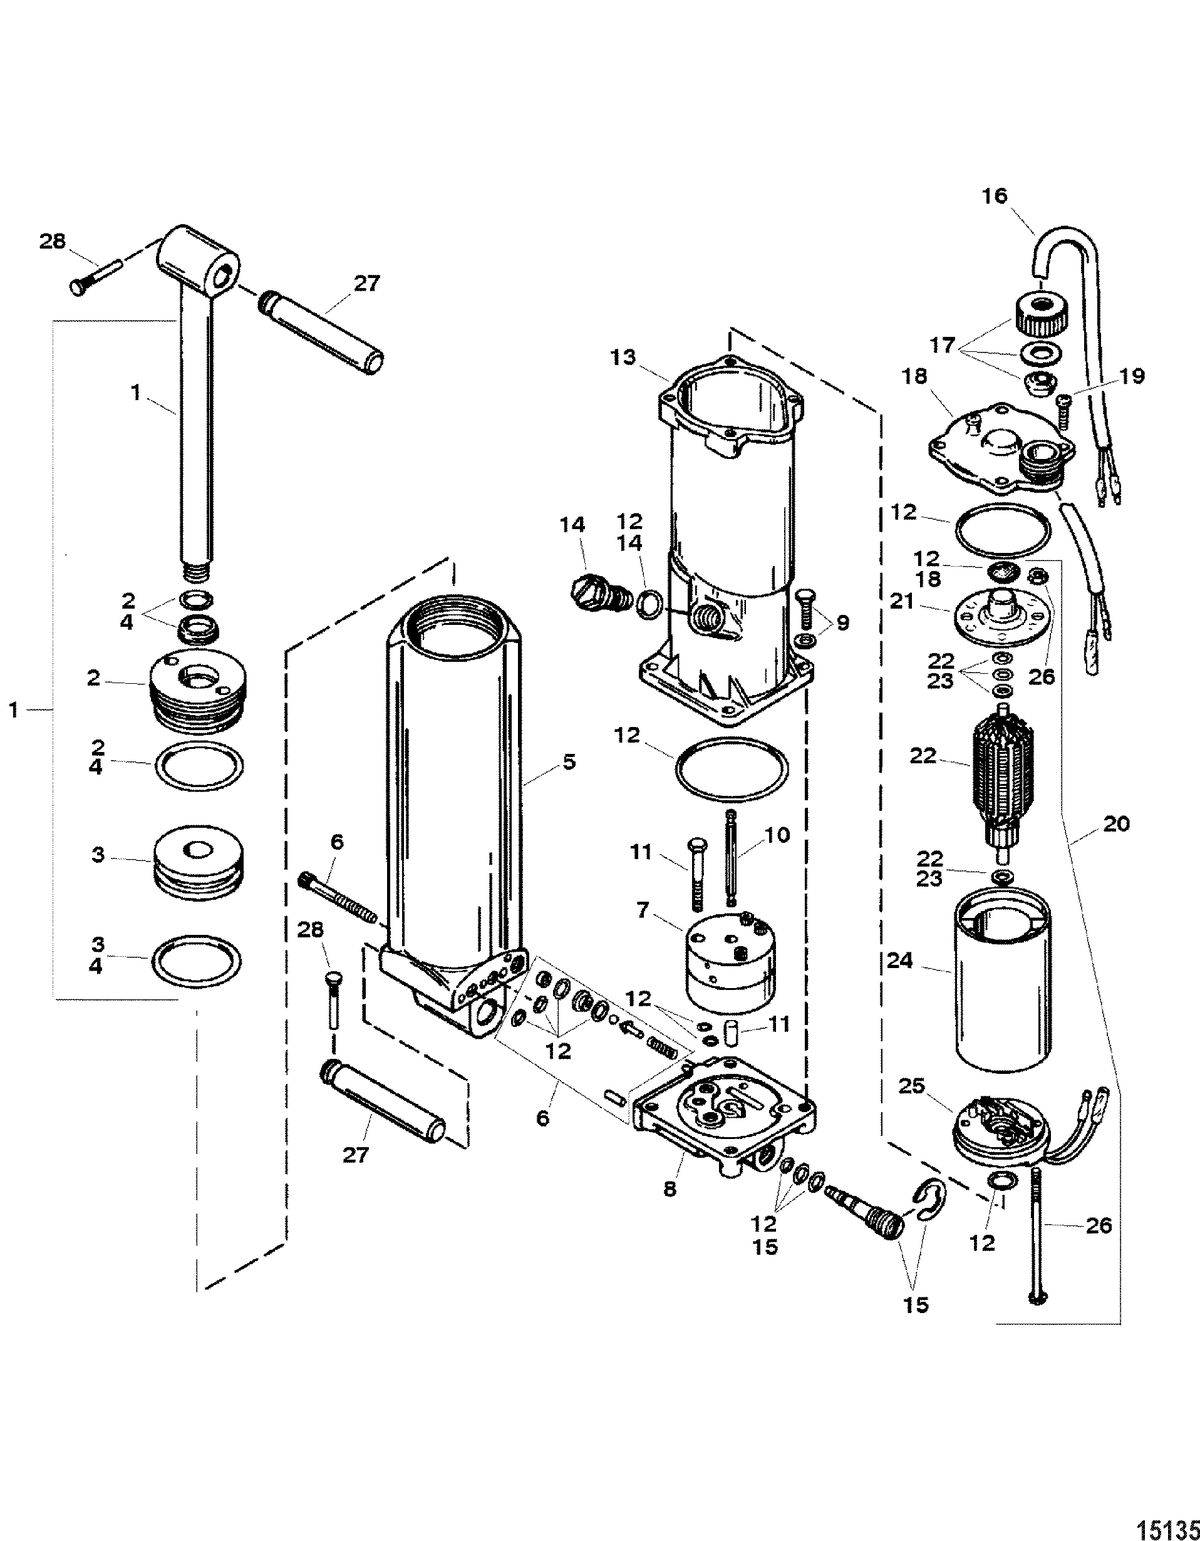 ACCESSORIES TRIM / TILT / LIFT SYSTEMS AND COMPONENTS Power Trim, Eaton Motor(19217A6 / 19217A7)